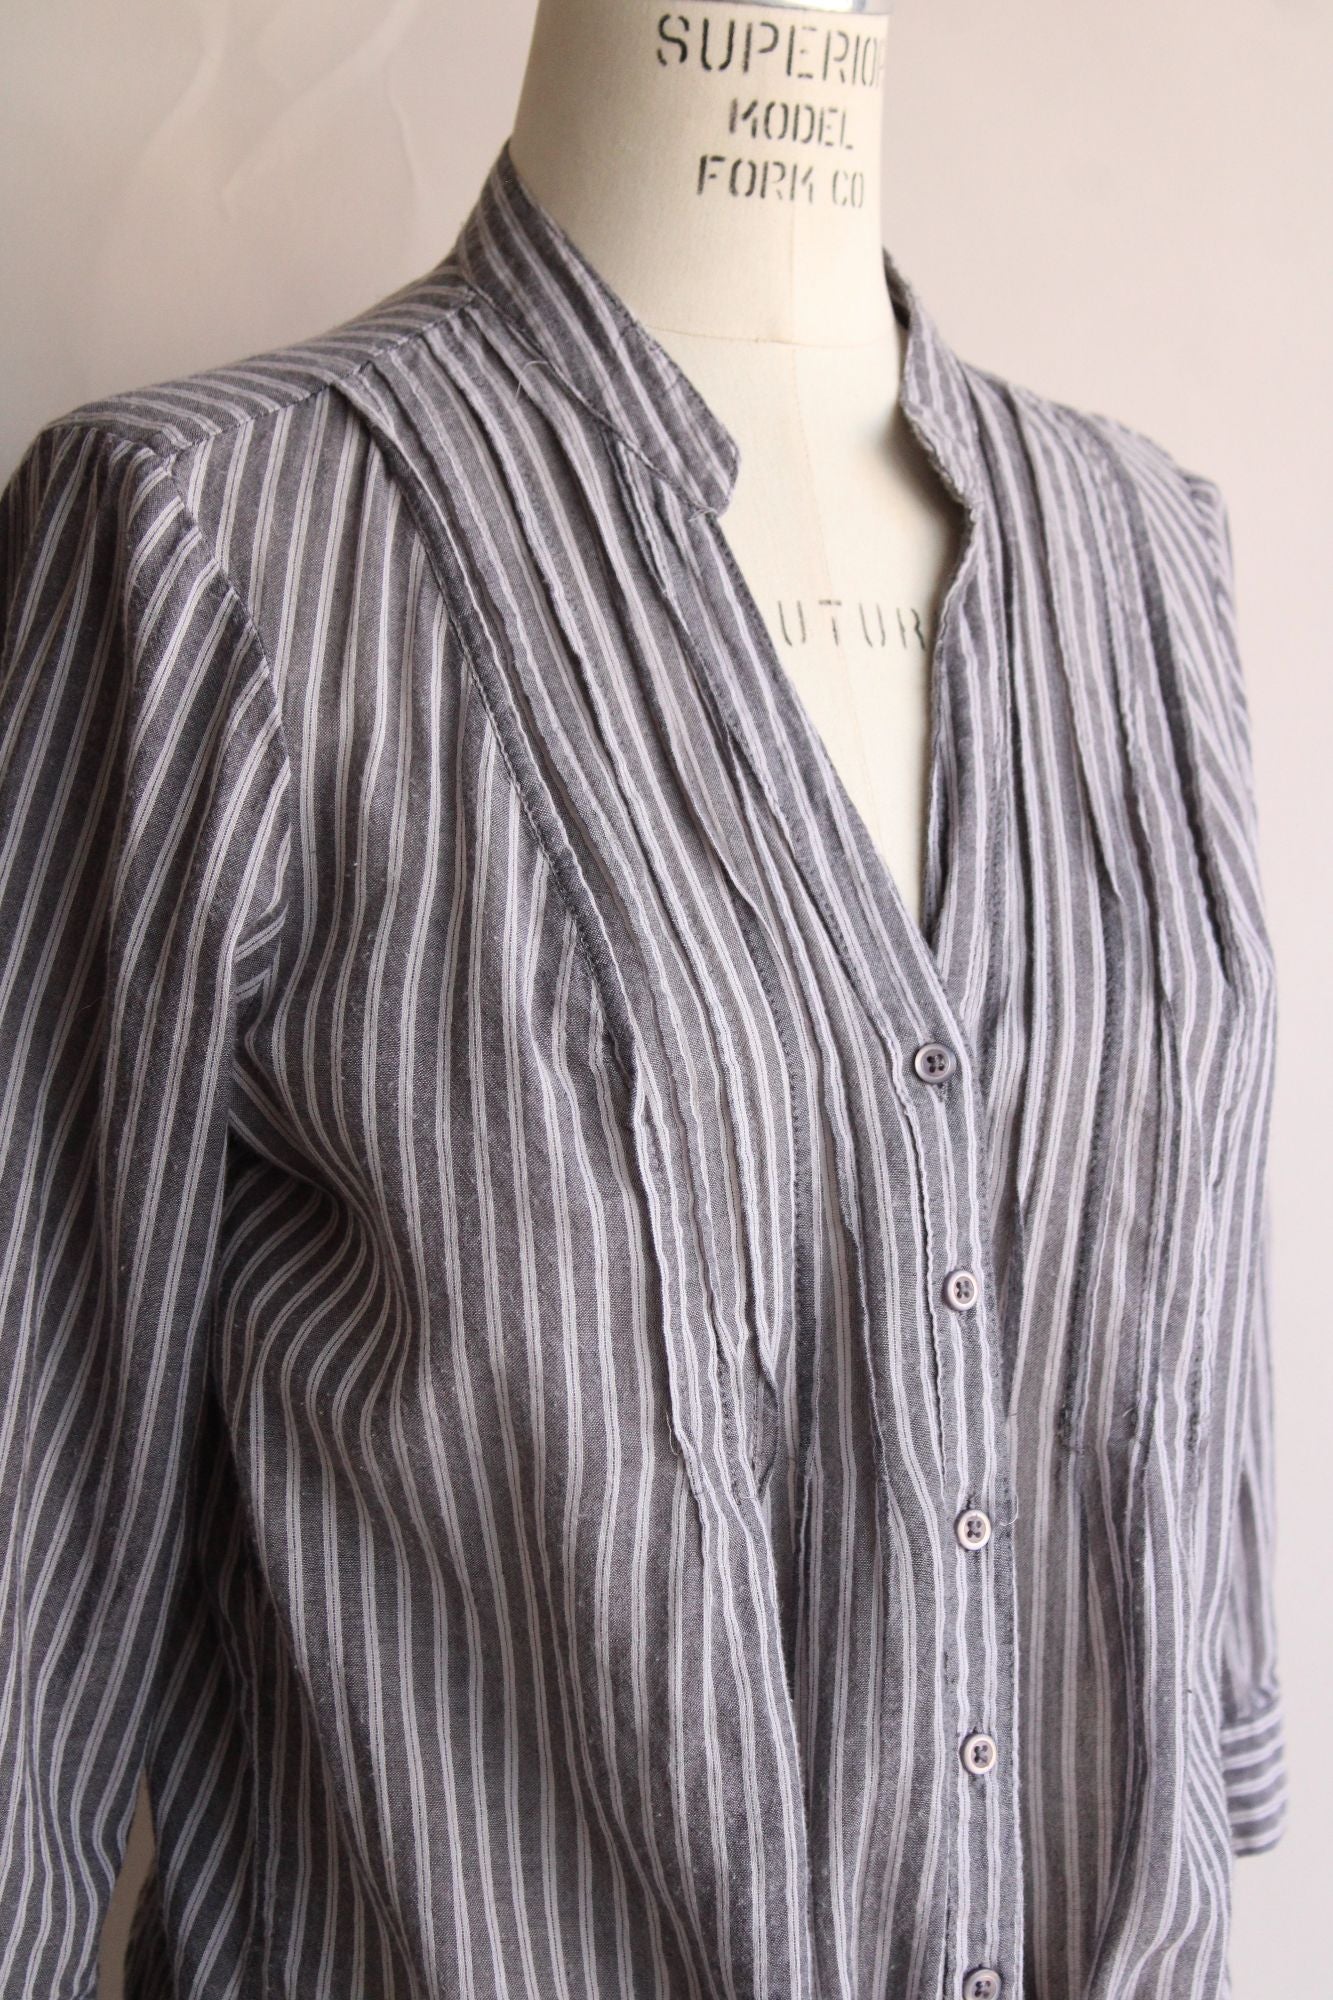 Mossimo Ladies Blouse, Size Large, Gray Pinstripe, Cuffed Sleeve, Cott –  Toadstool Farm Vintage